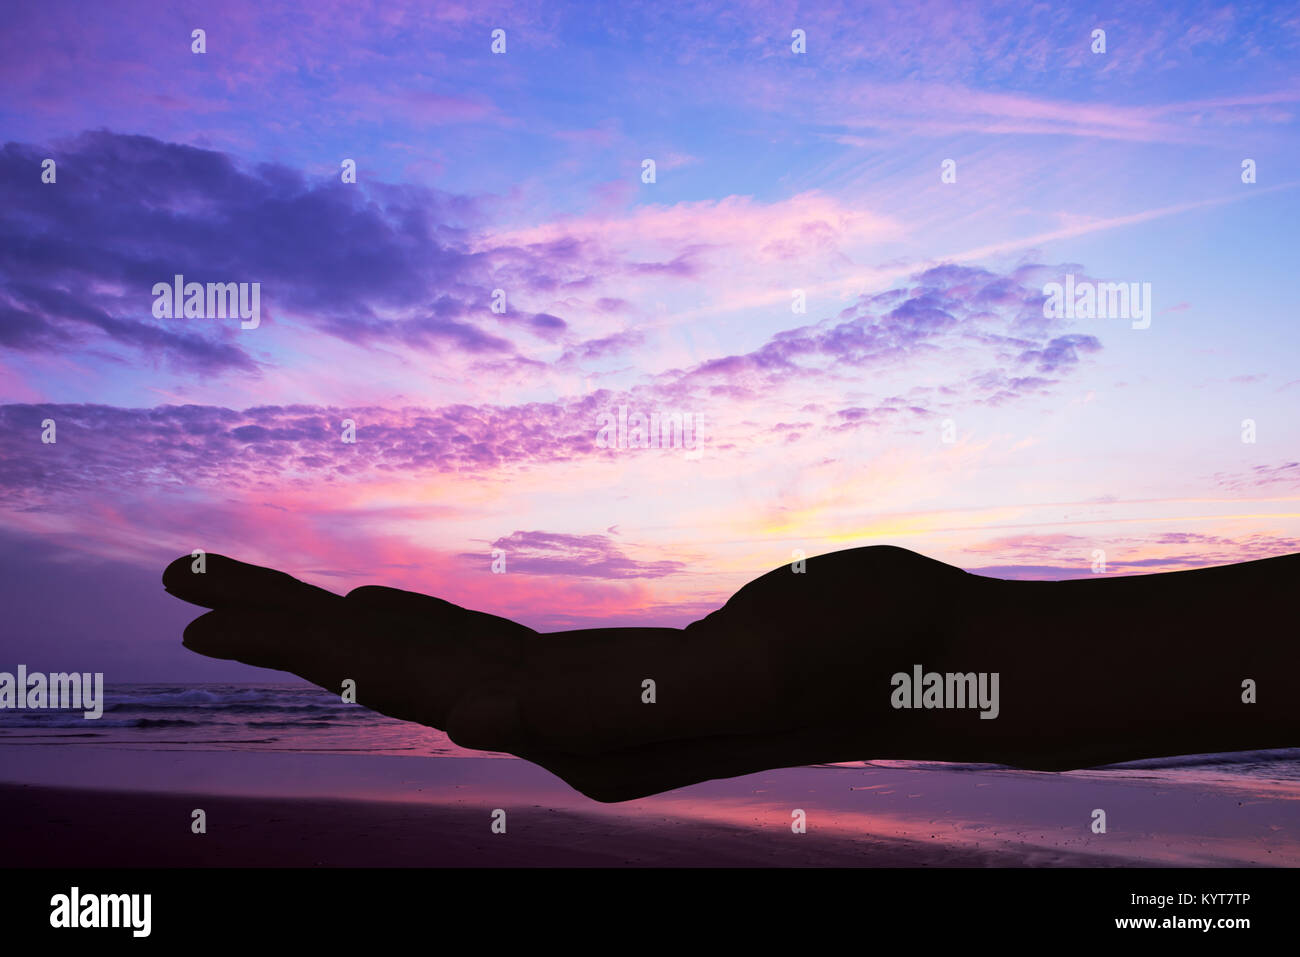 Silhouette of an opened hand, sunset background Stock Photo